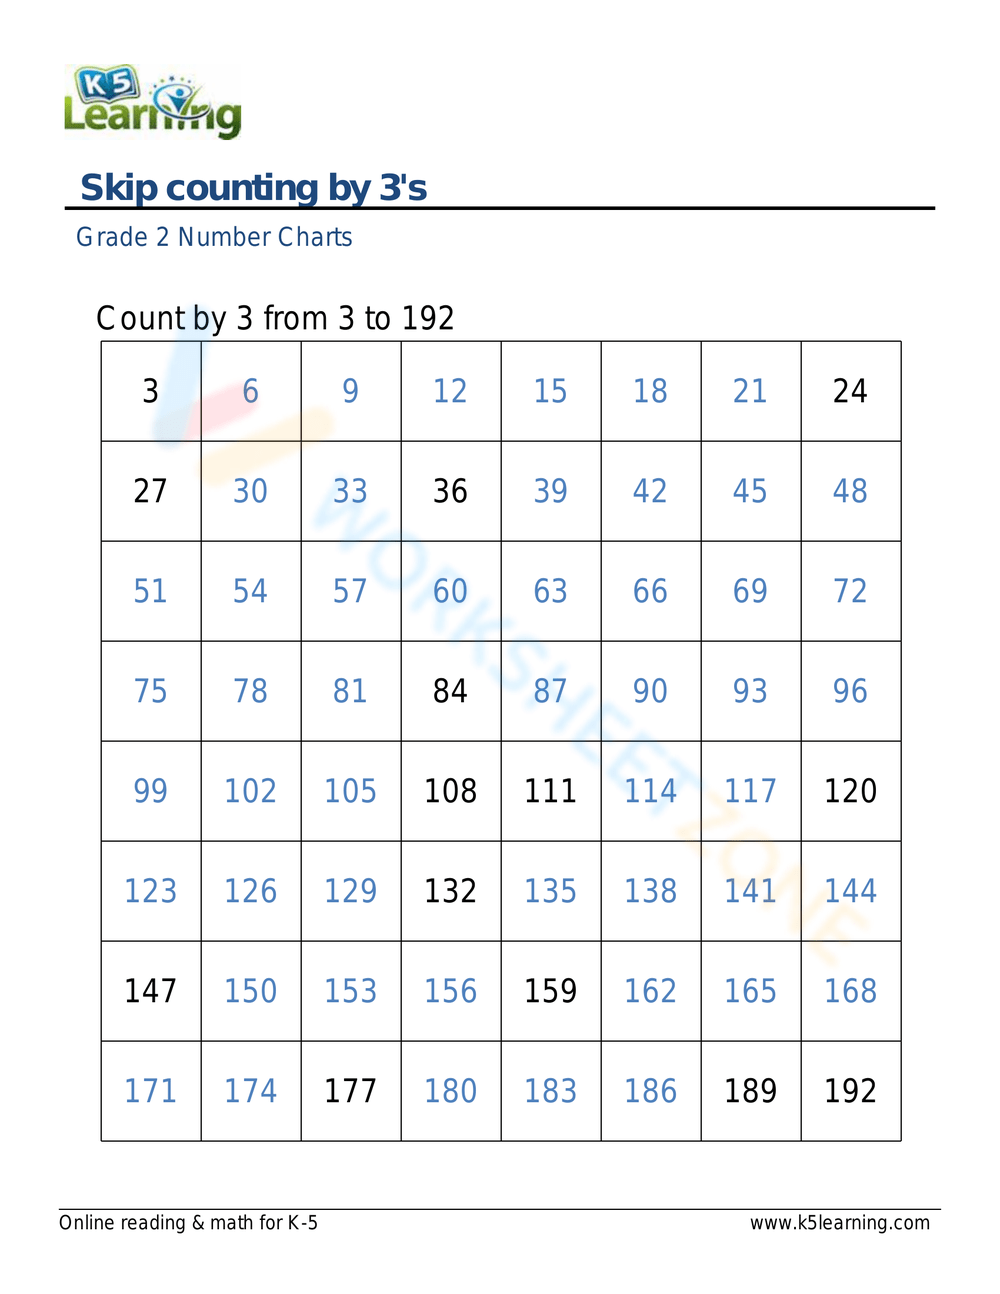 Skip counting by 3's